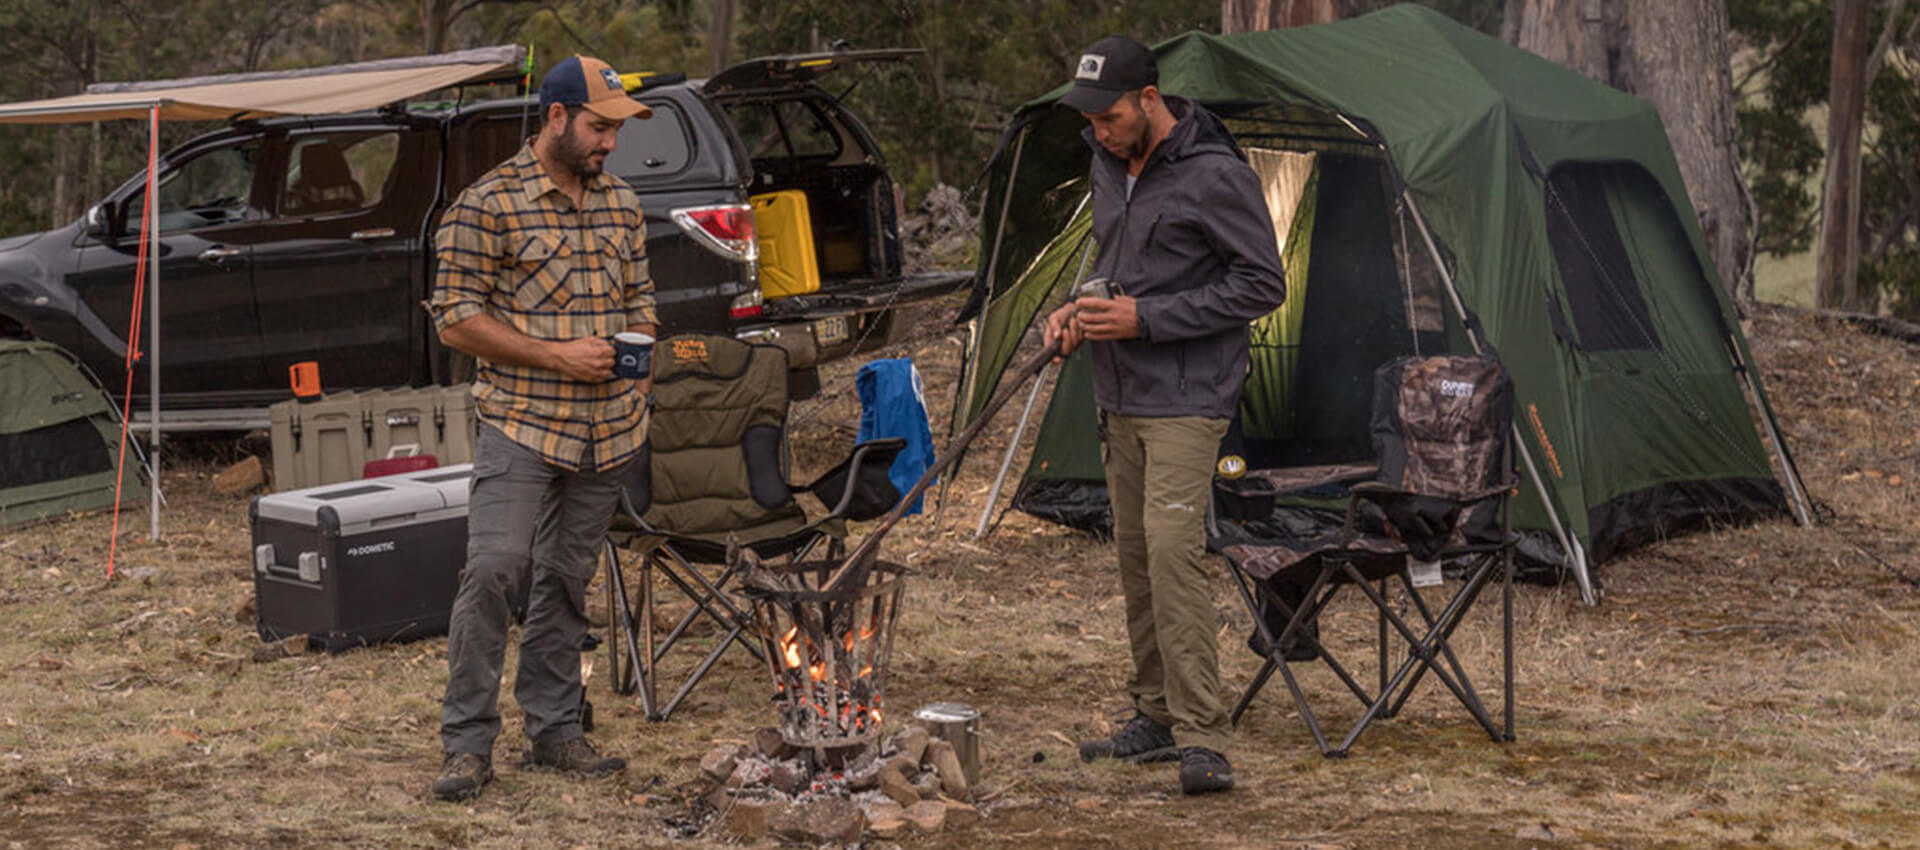 2 men standing around a campfire with pitched tent, camping chairs and portable fridges in the background